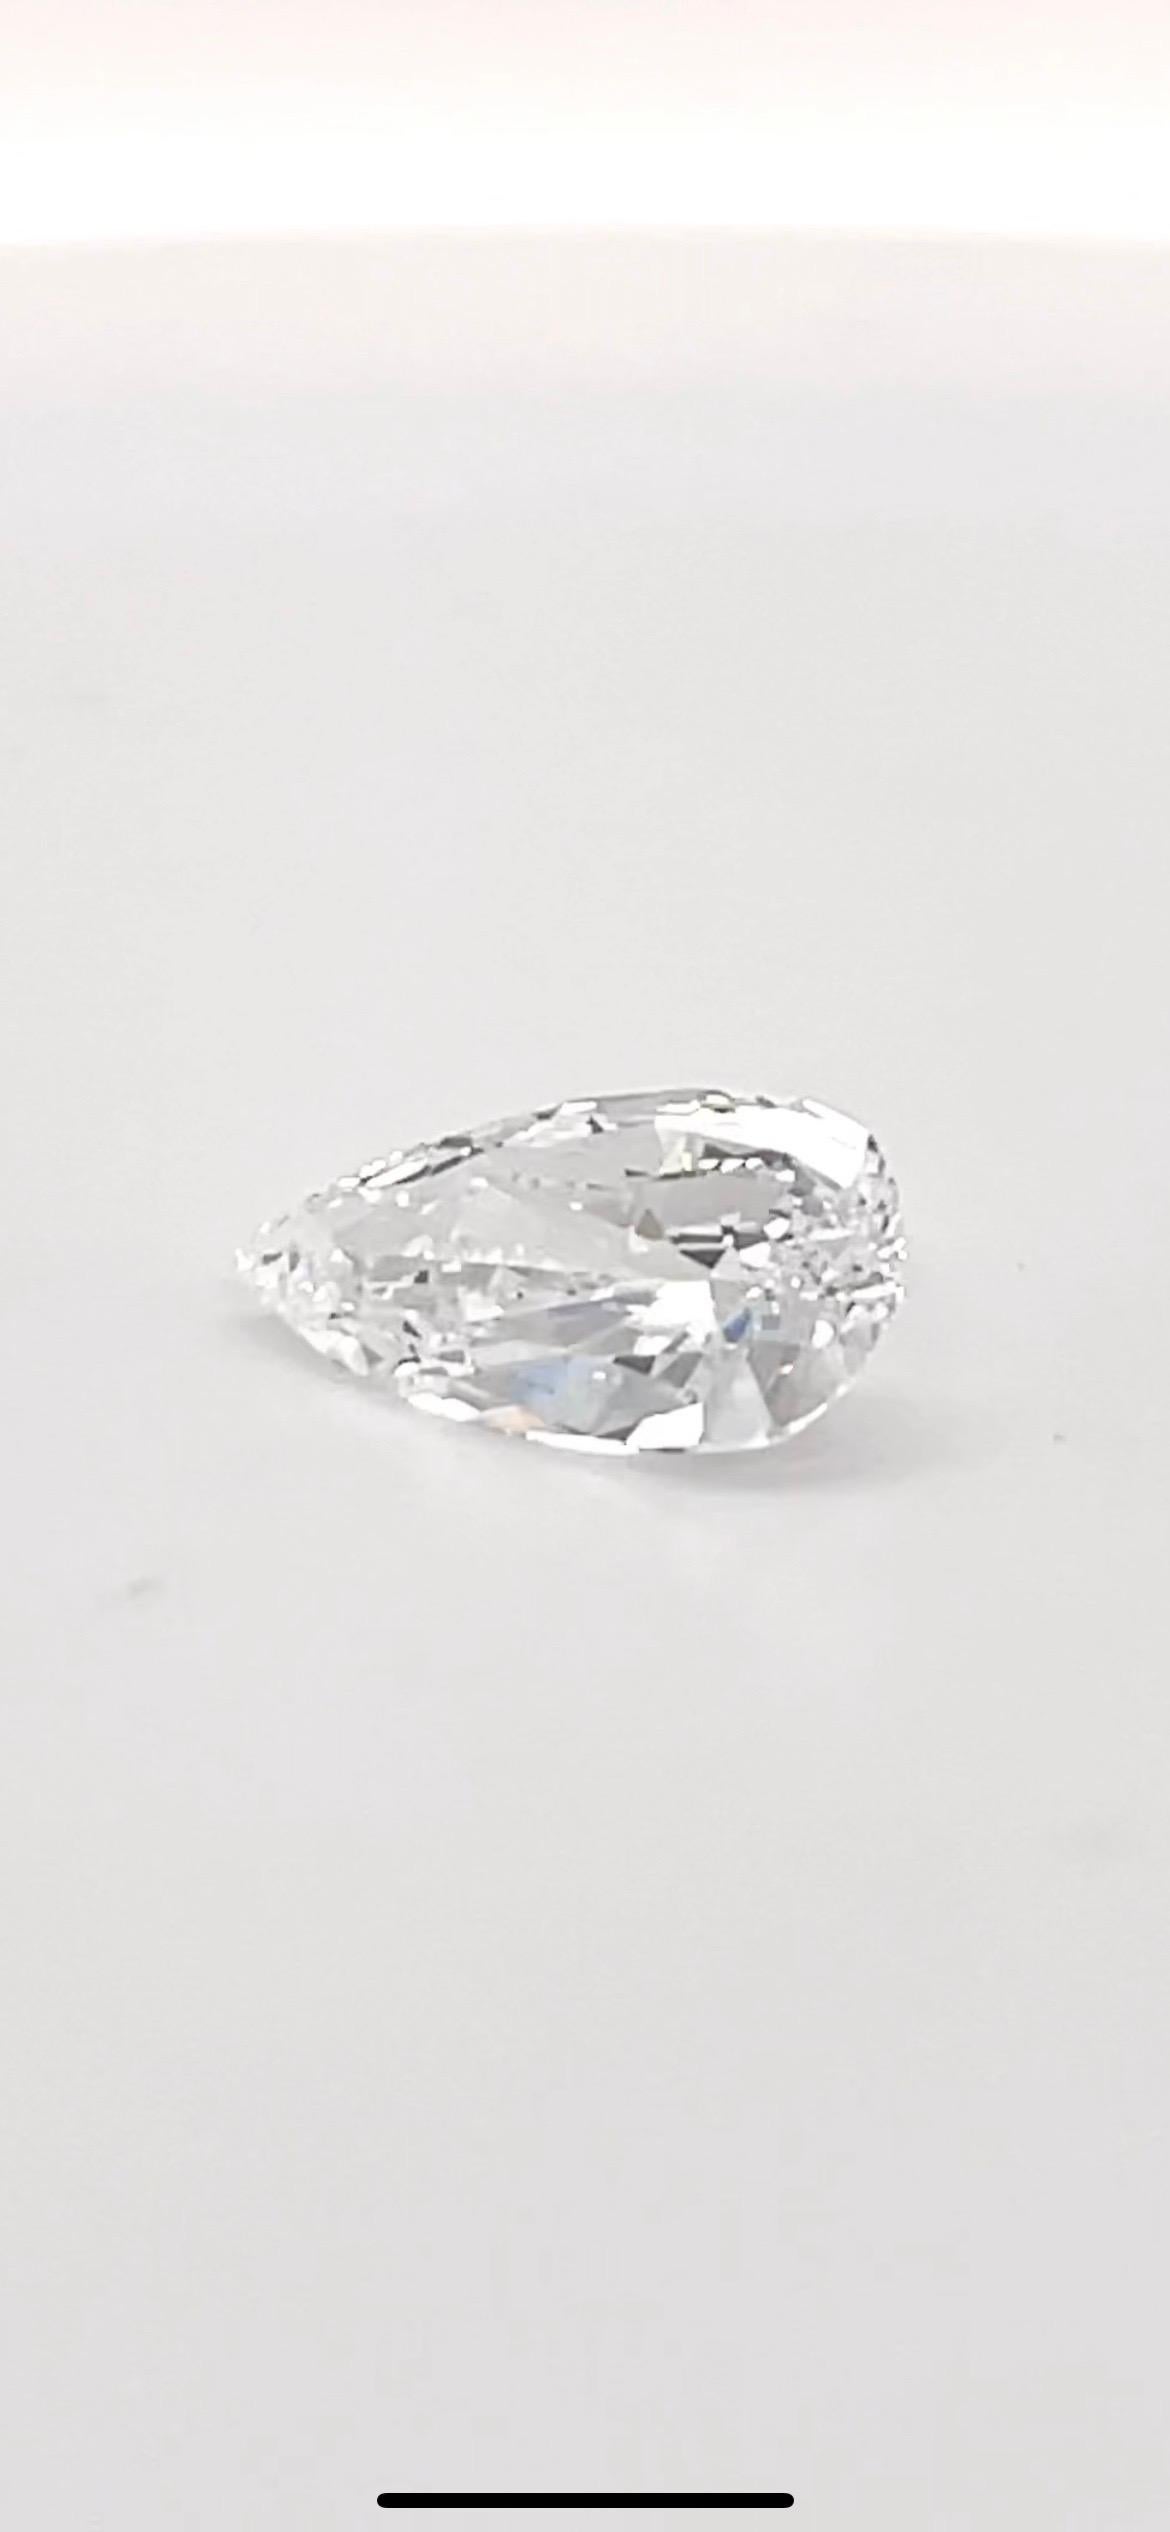 Rare 3 Carat D IF Pear GIA#2203210541 Certified Natural Diamond (4 carat Spread) Custom Designed to Your Specifications